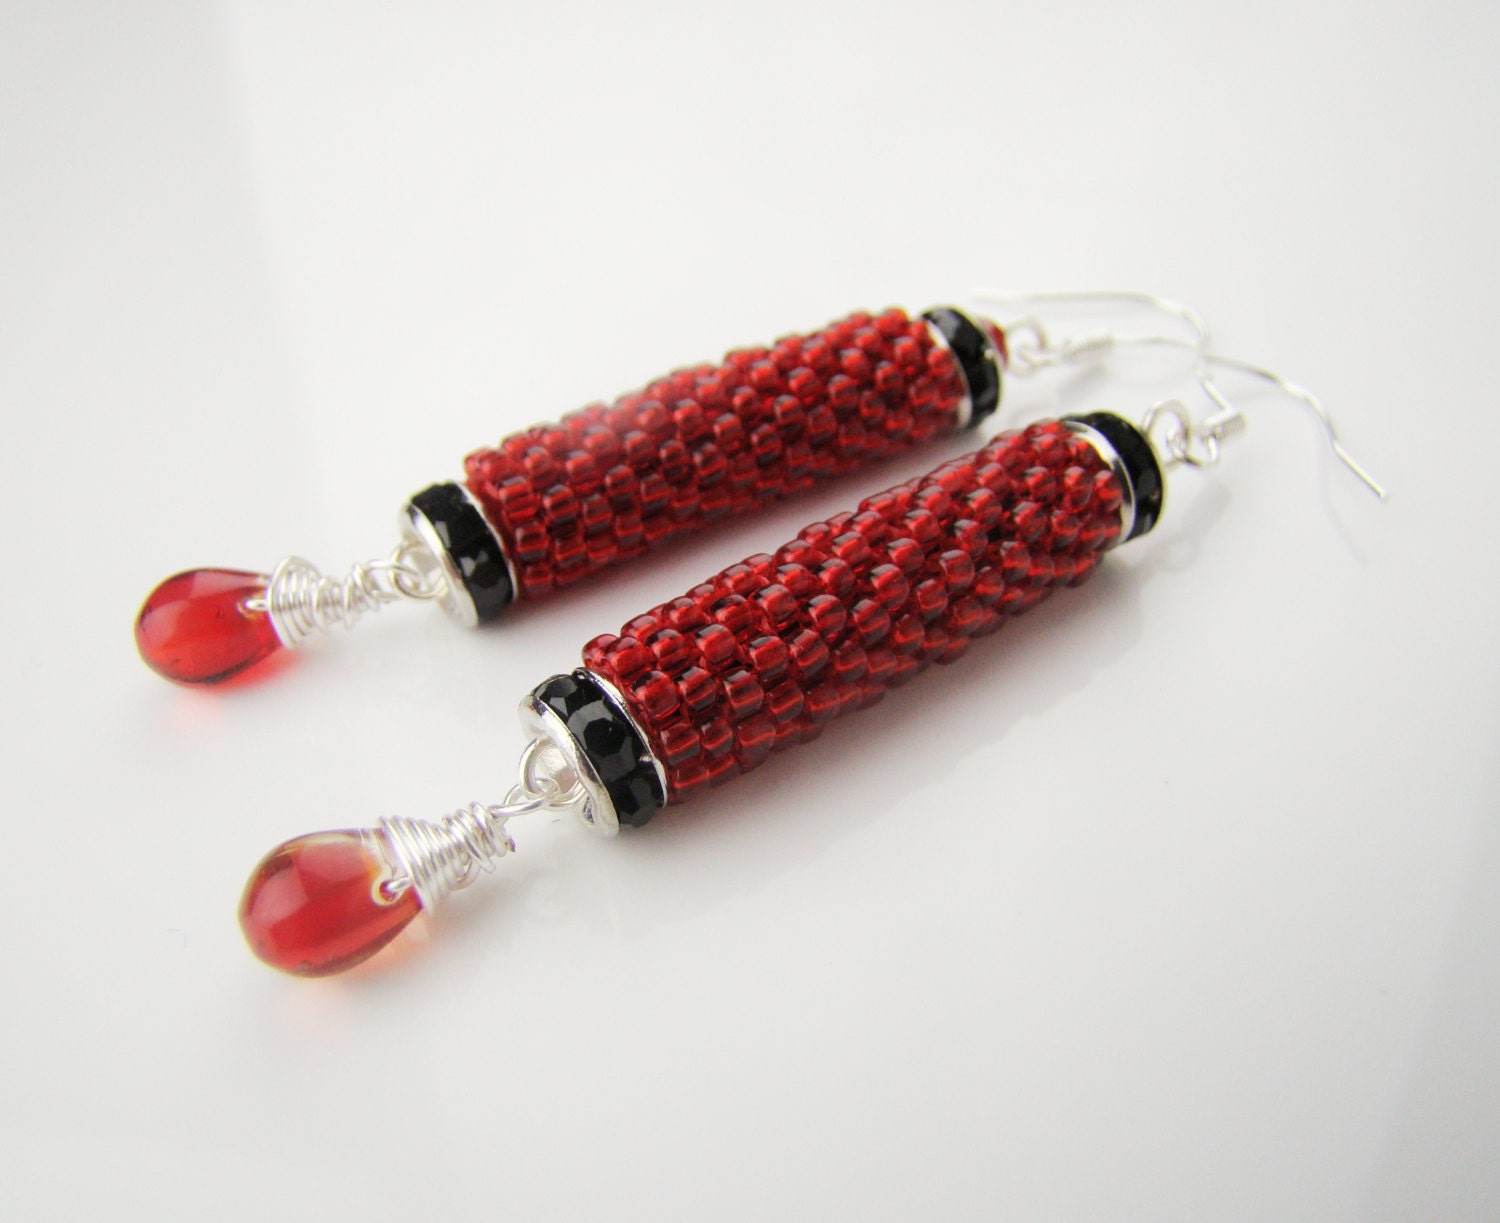 Ruby red seed bead elongate earrings, beadweaved earrings, long earrings, dangle earrings, glass, handcrafted artisan jewelry, 7PM boutique - 7PMboutique